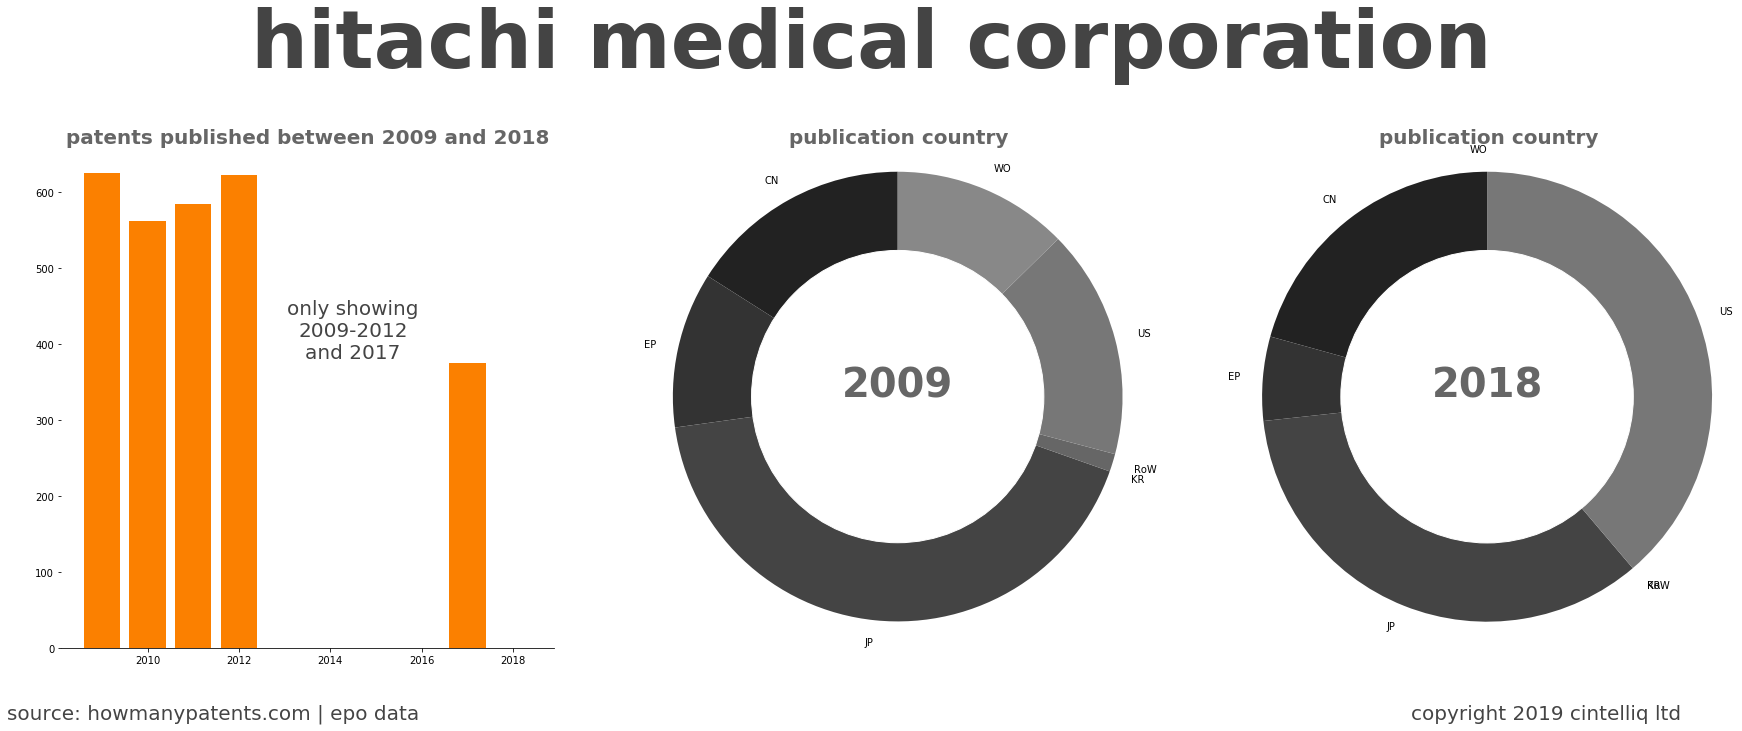 summary of patents for Hitachi Medical Corporation